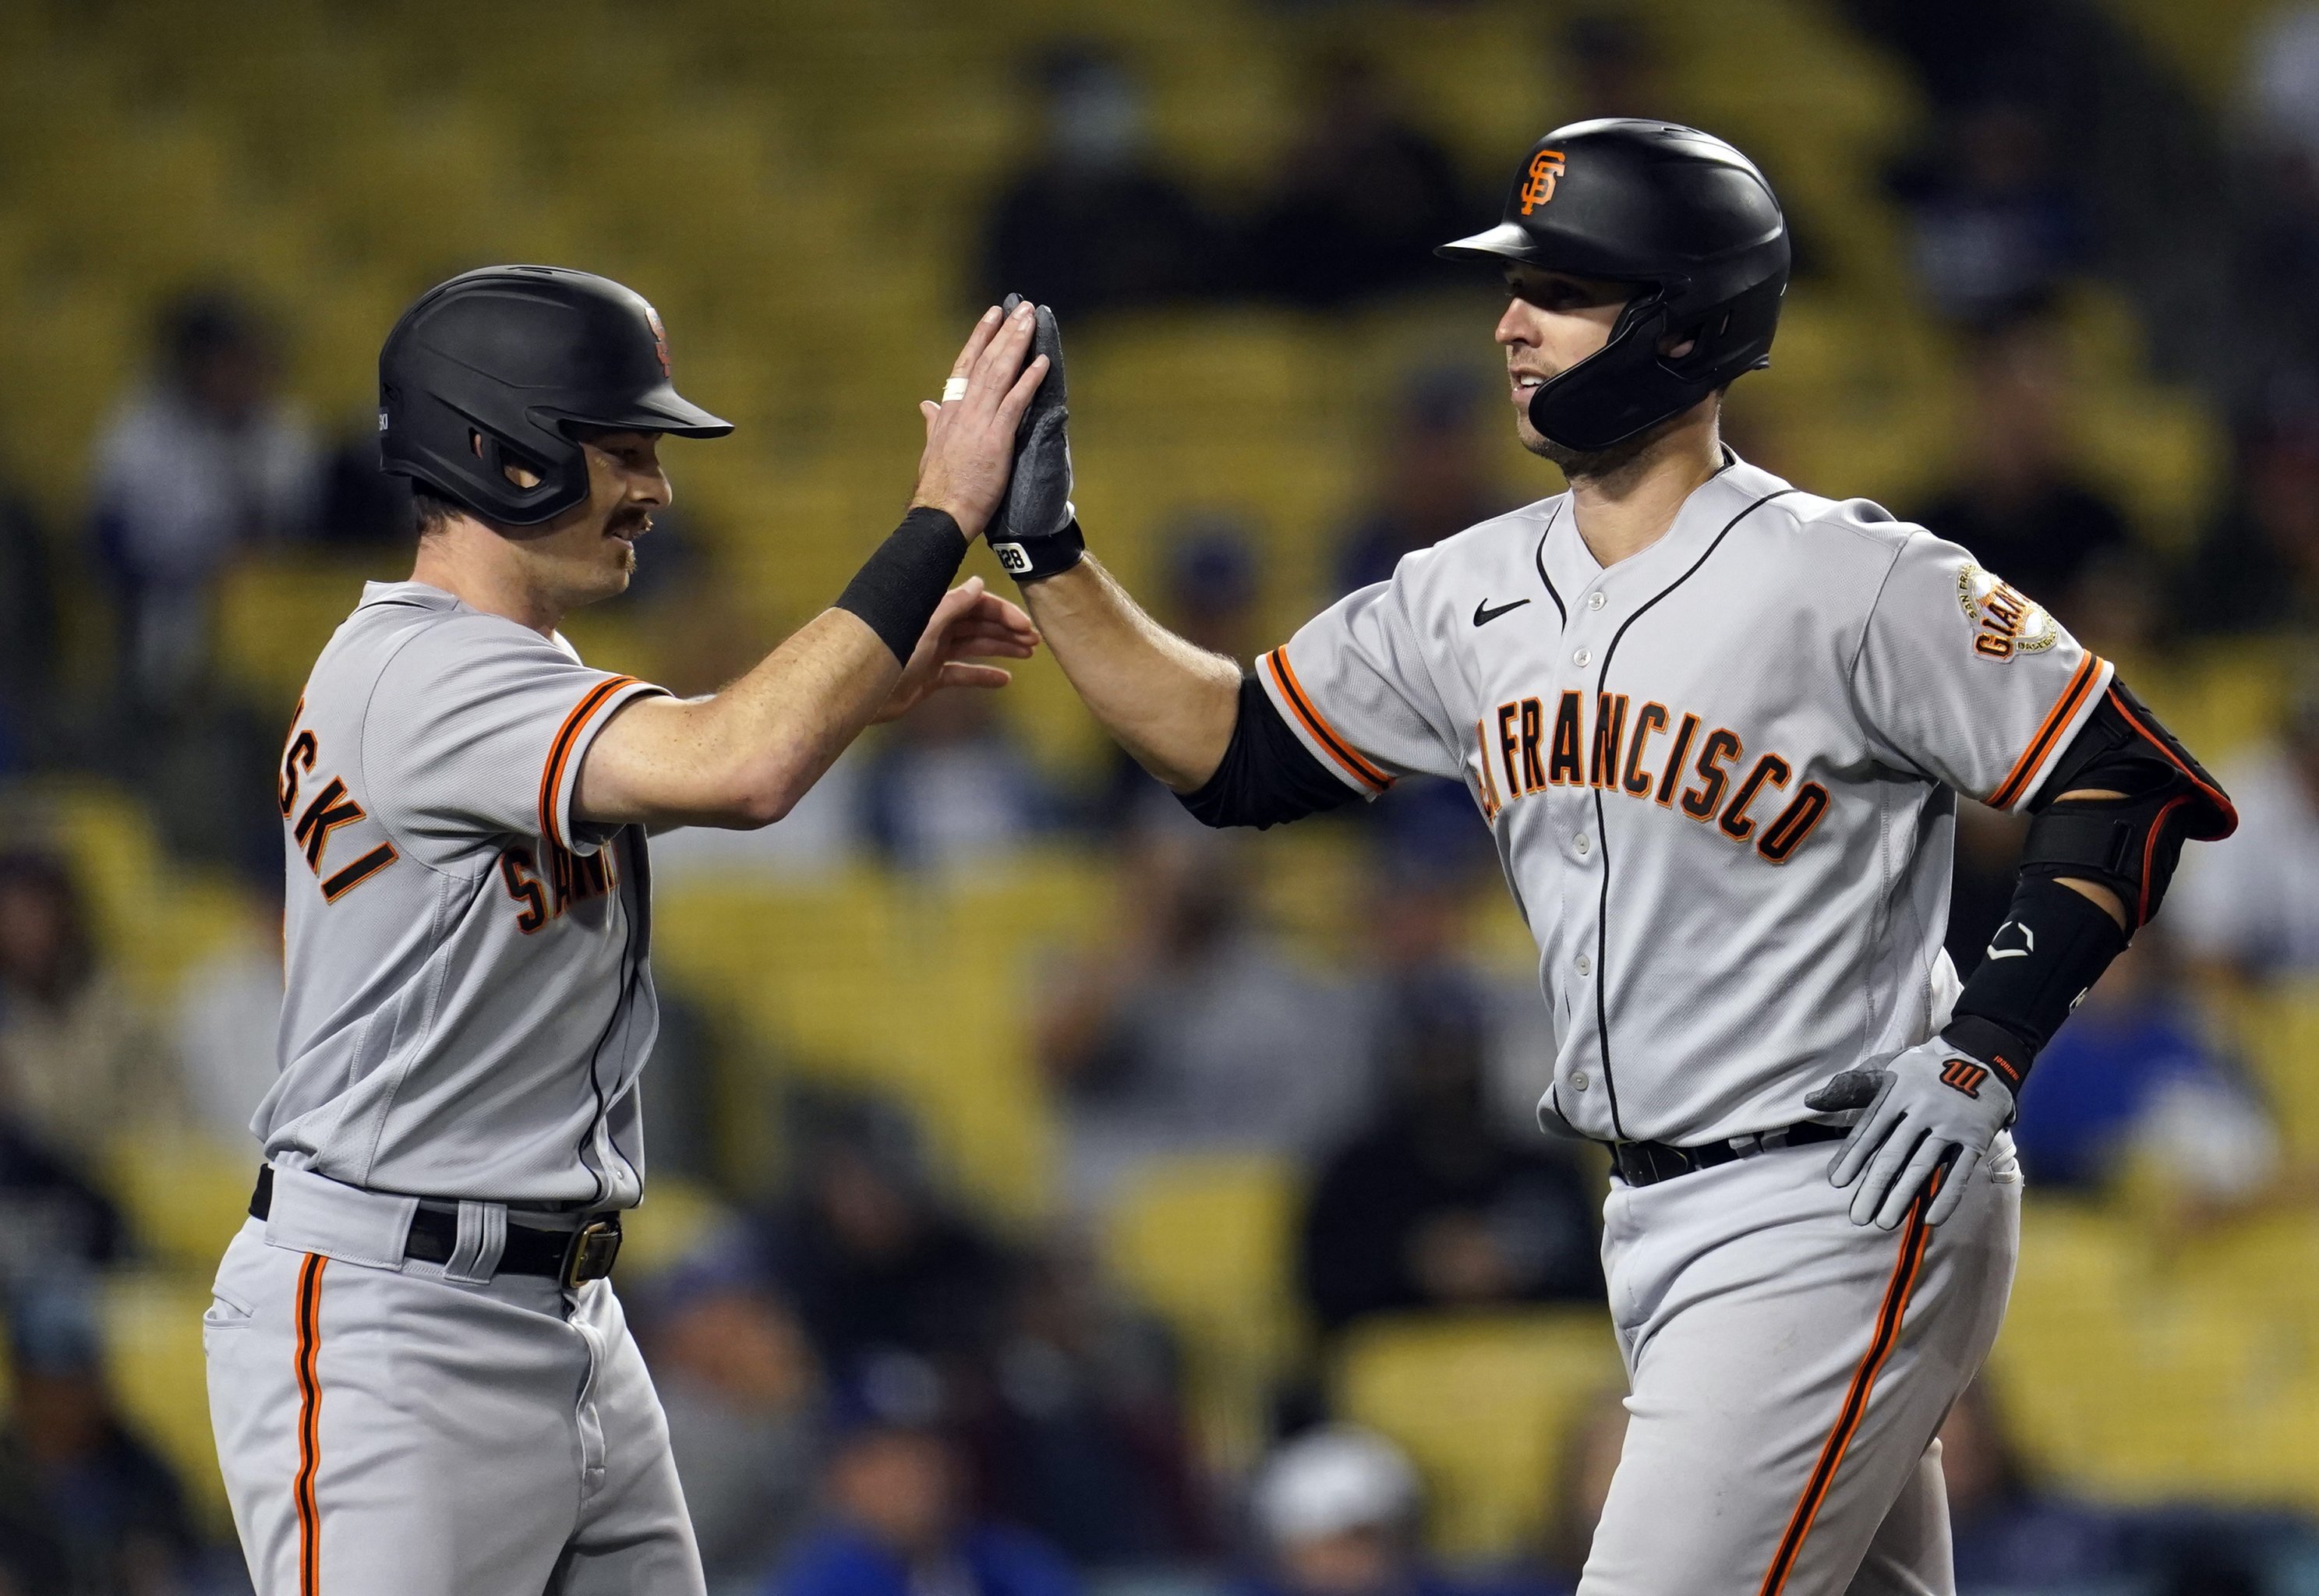 Posey Surpasses Even the Giants' High Hopes - The New York Times